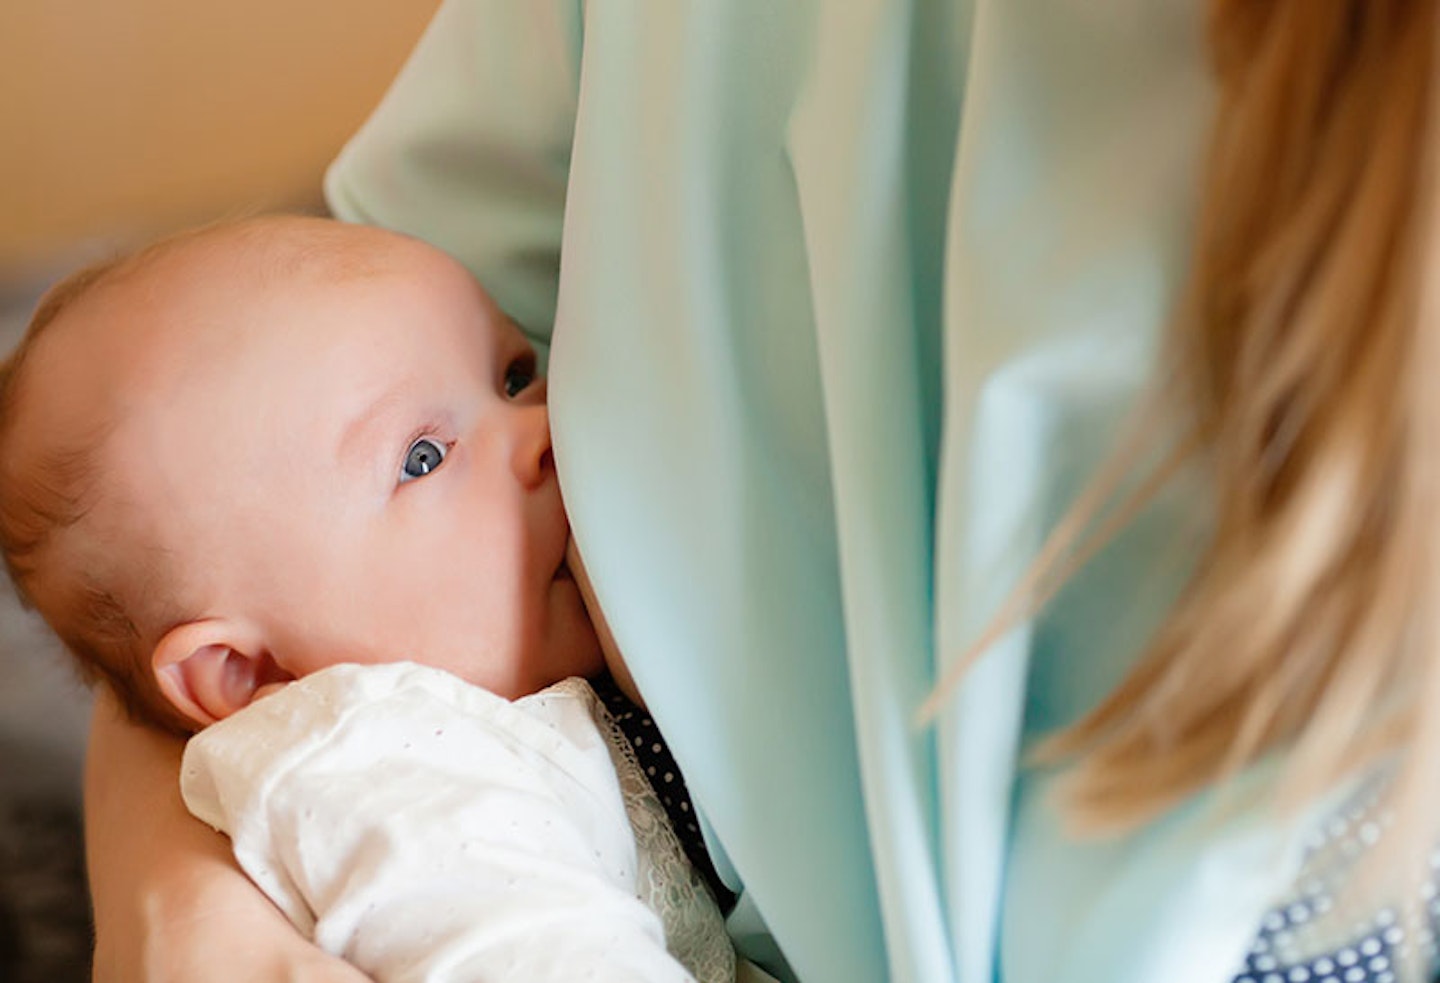 Breastfeeding reduces the risk of certain cancers in mothers